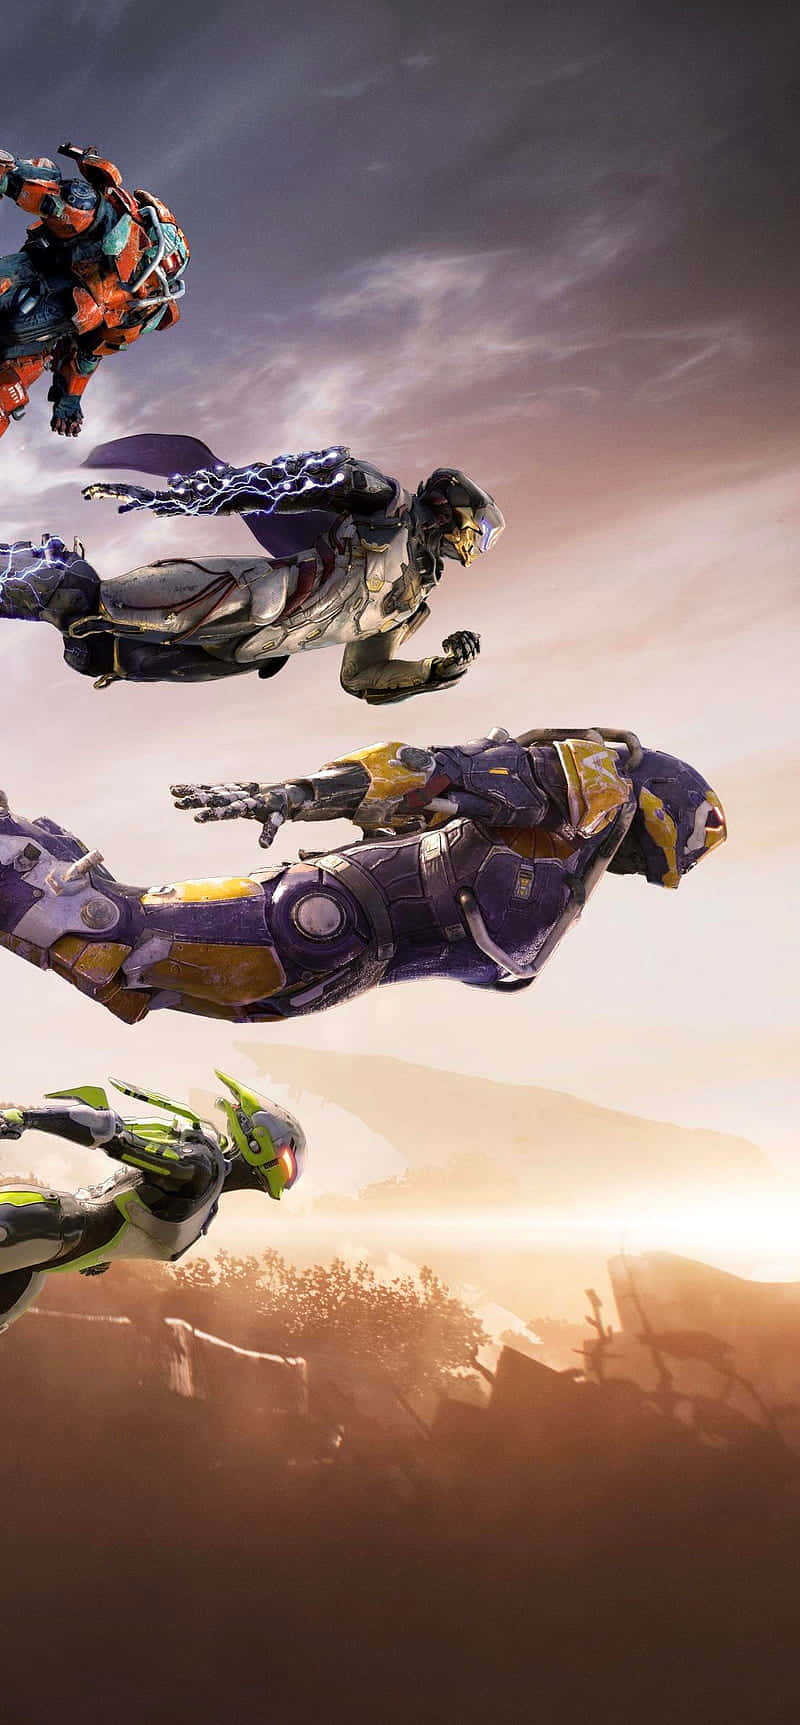 Customize your Javelin and explore the world in "Anthem" Wallpaper